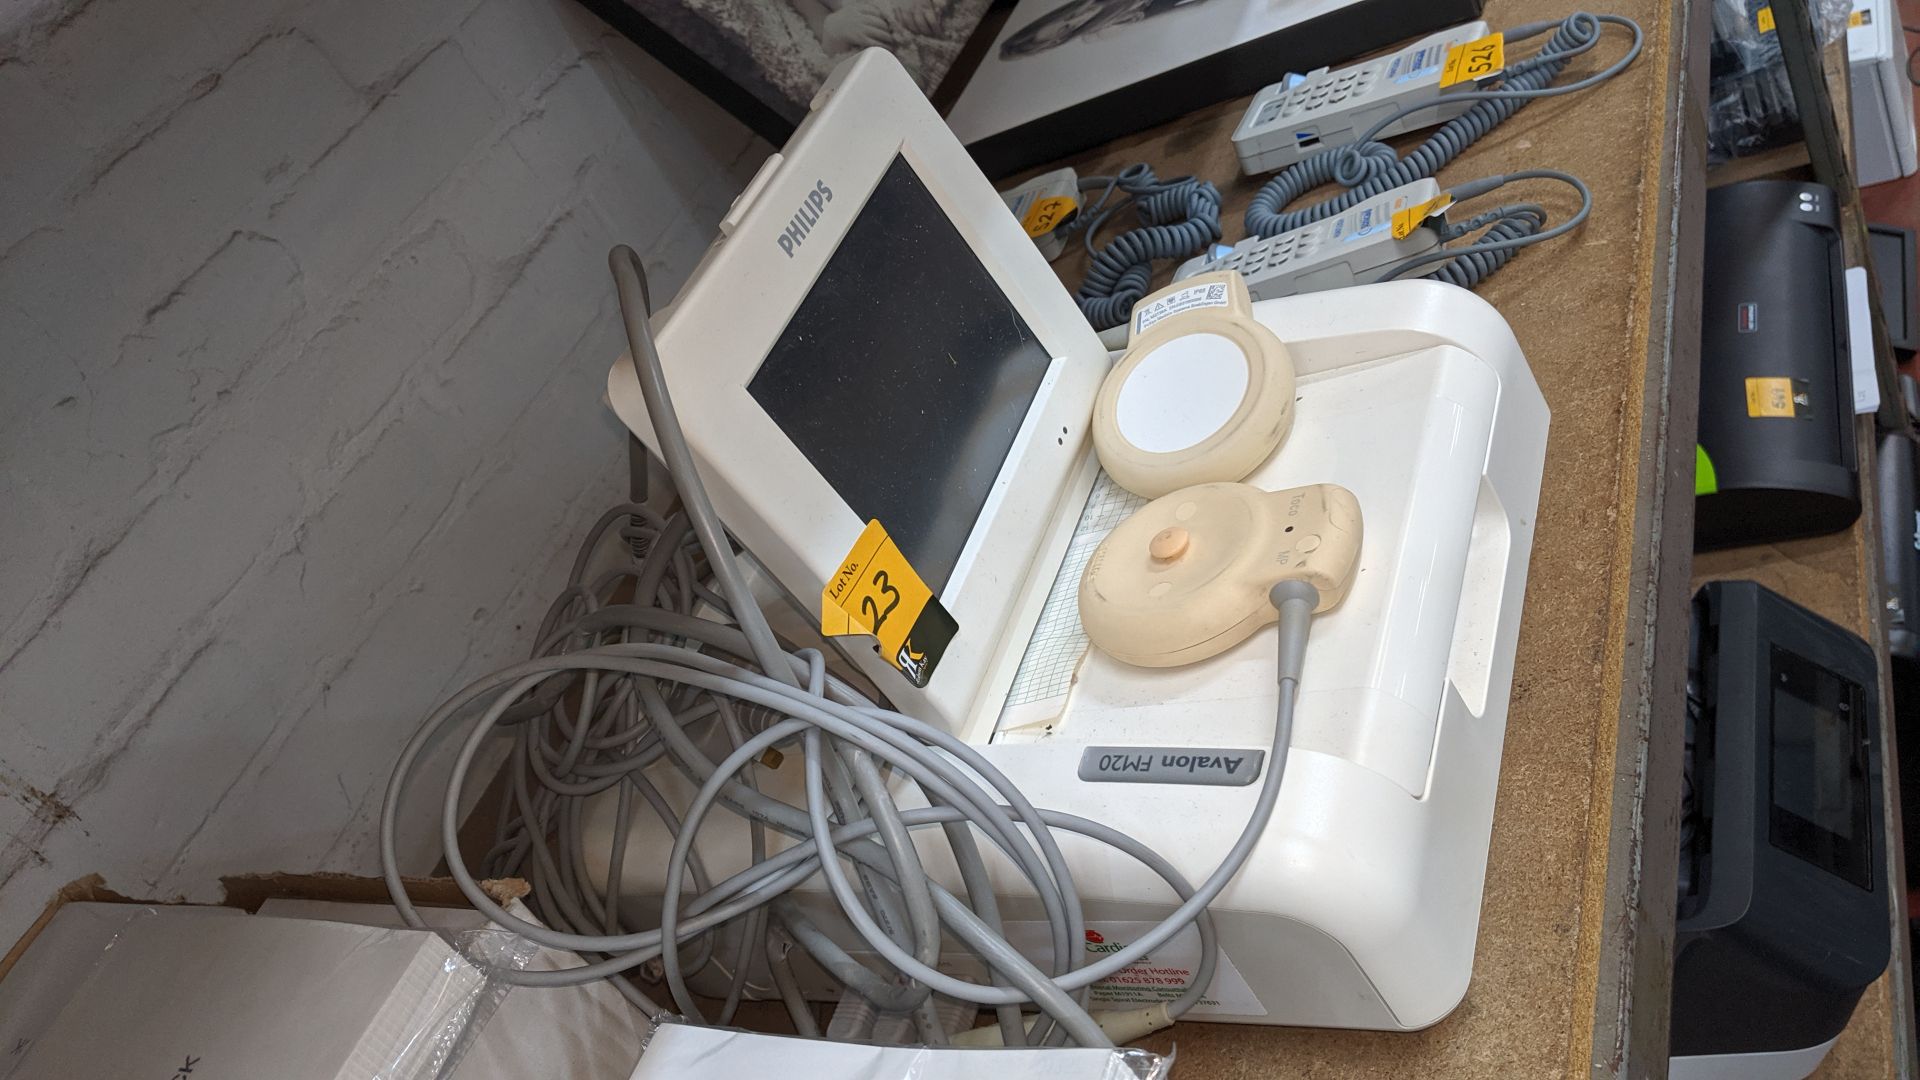 Philips Avalon model FM20 foetal monitor. This is one of a large number of lots used/owned by One To - Image 3 of 7